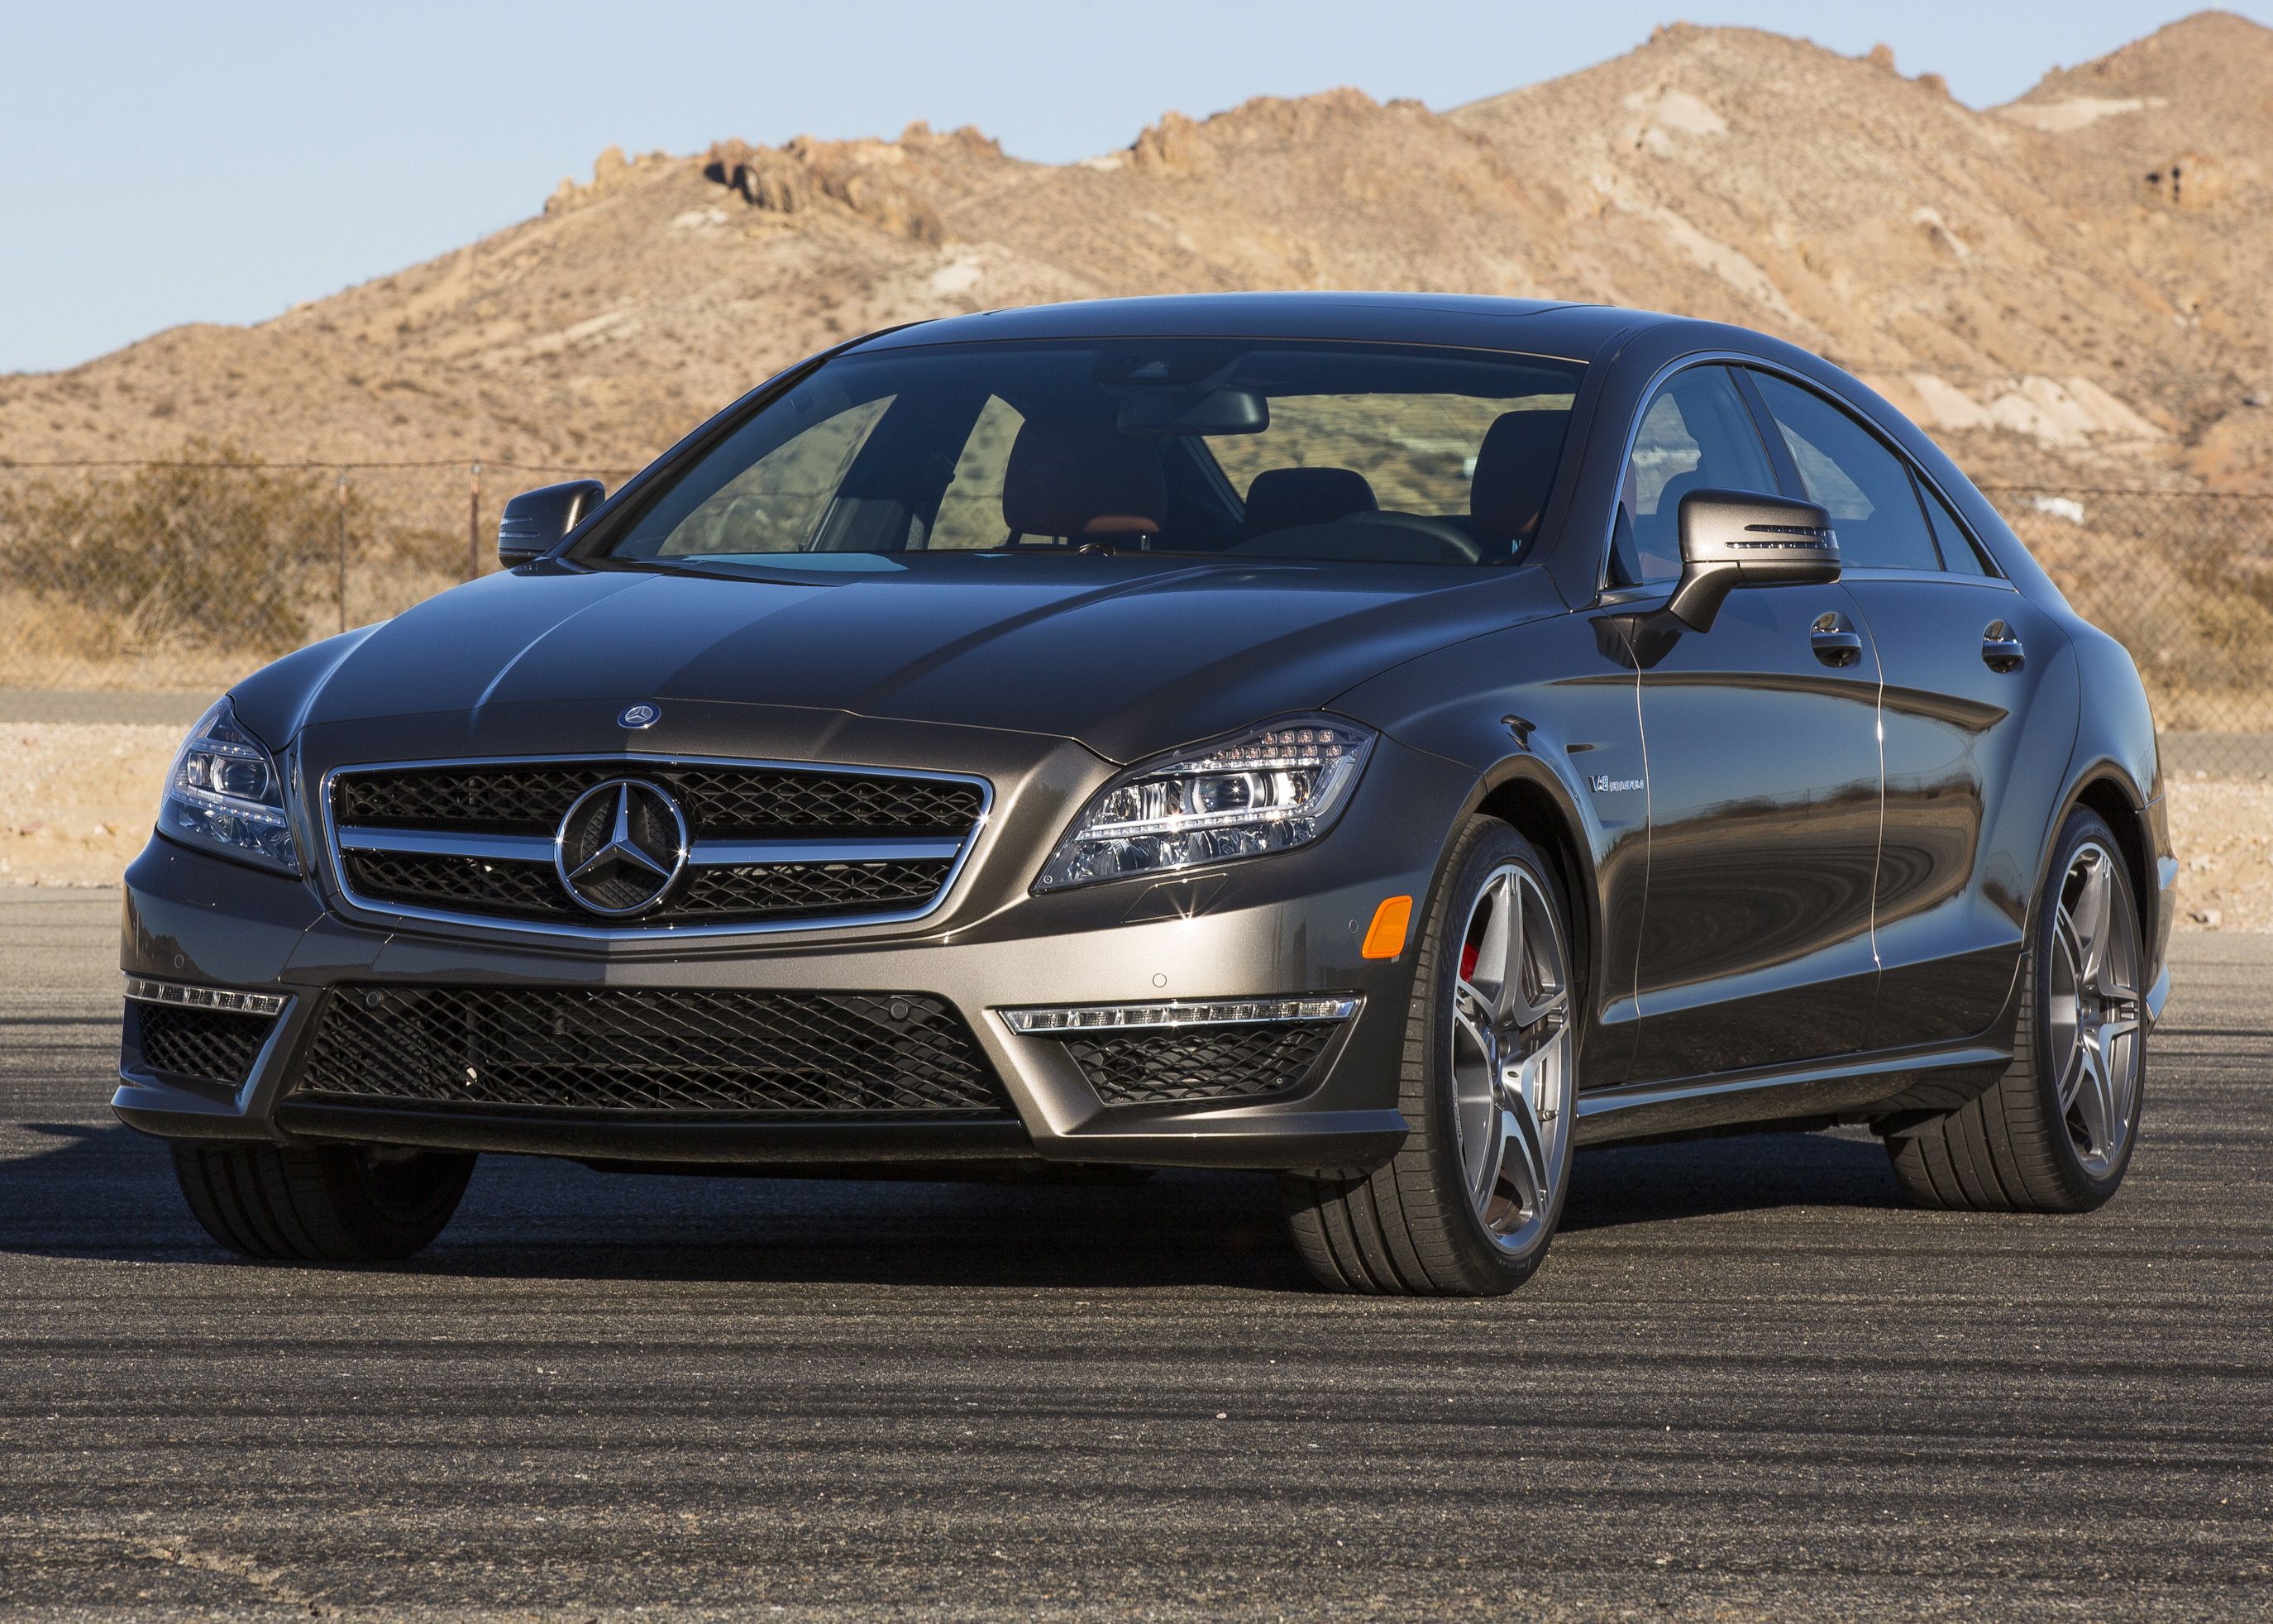 Mercedes-AMG CLS63 S Review, Pricing and Specs